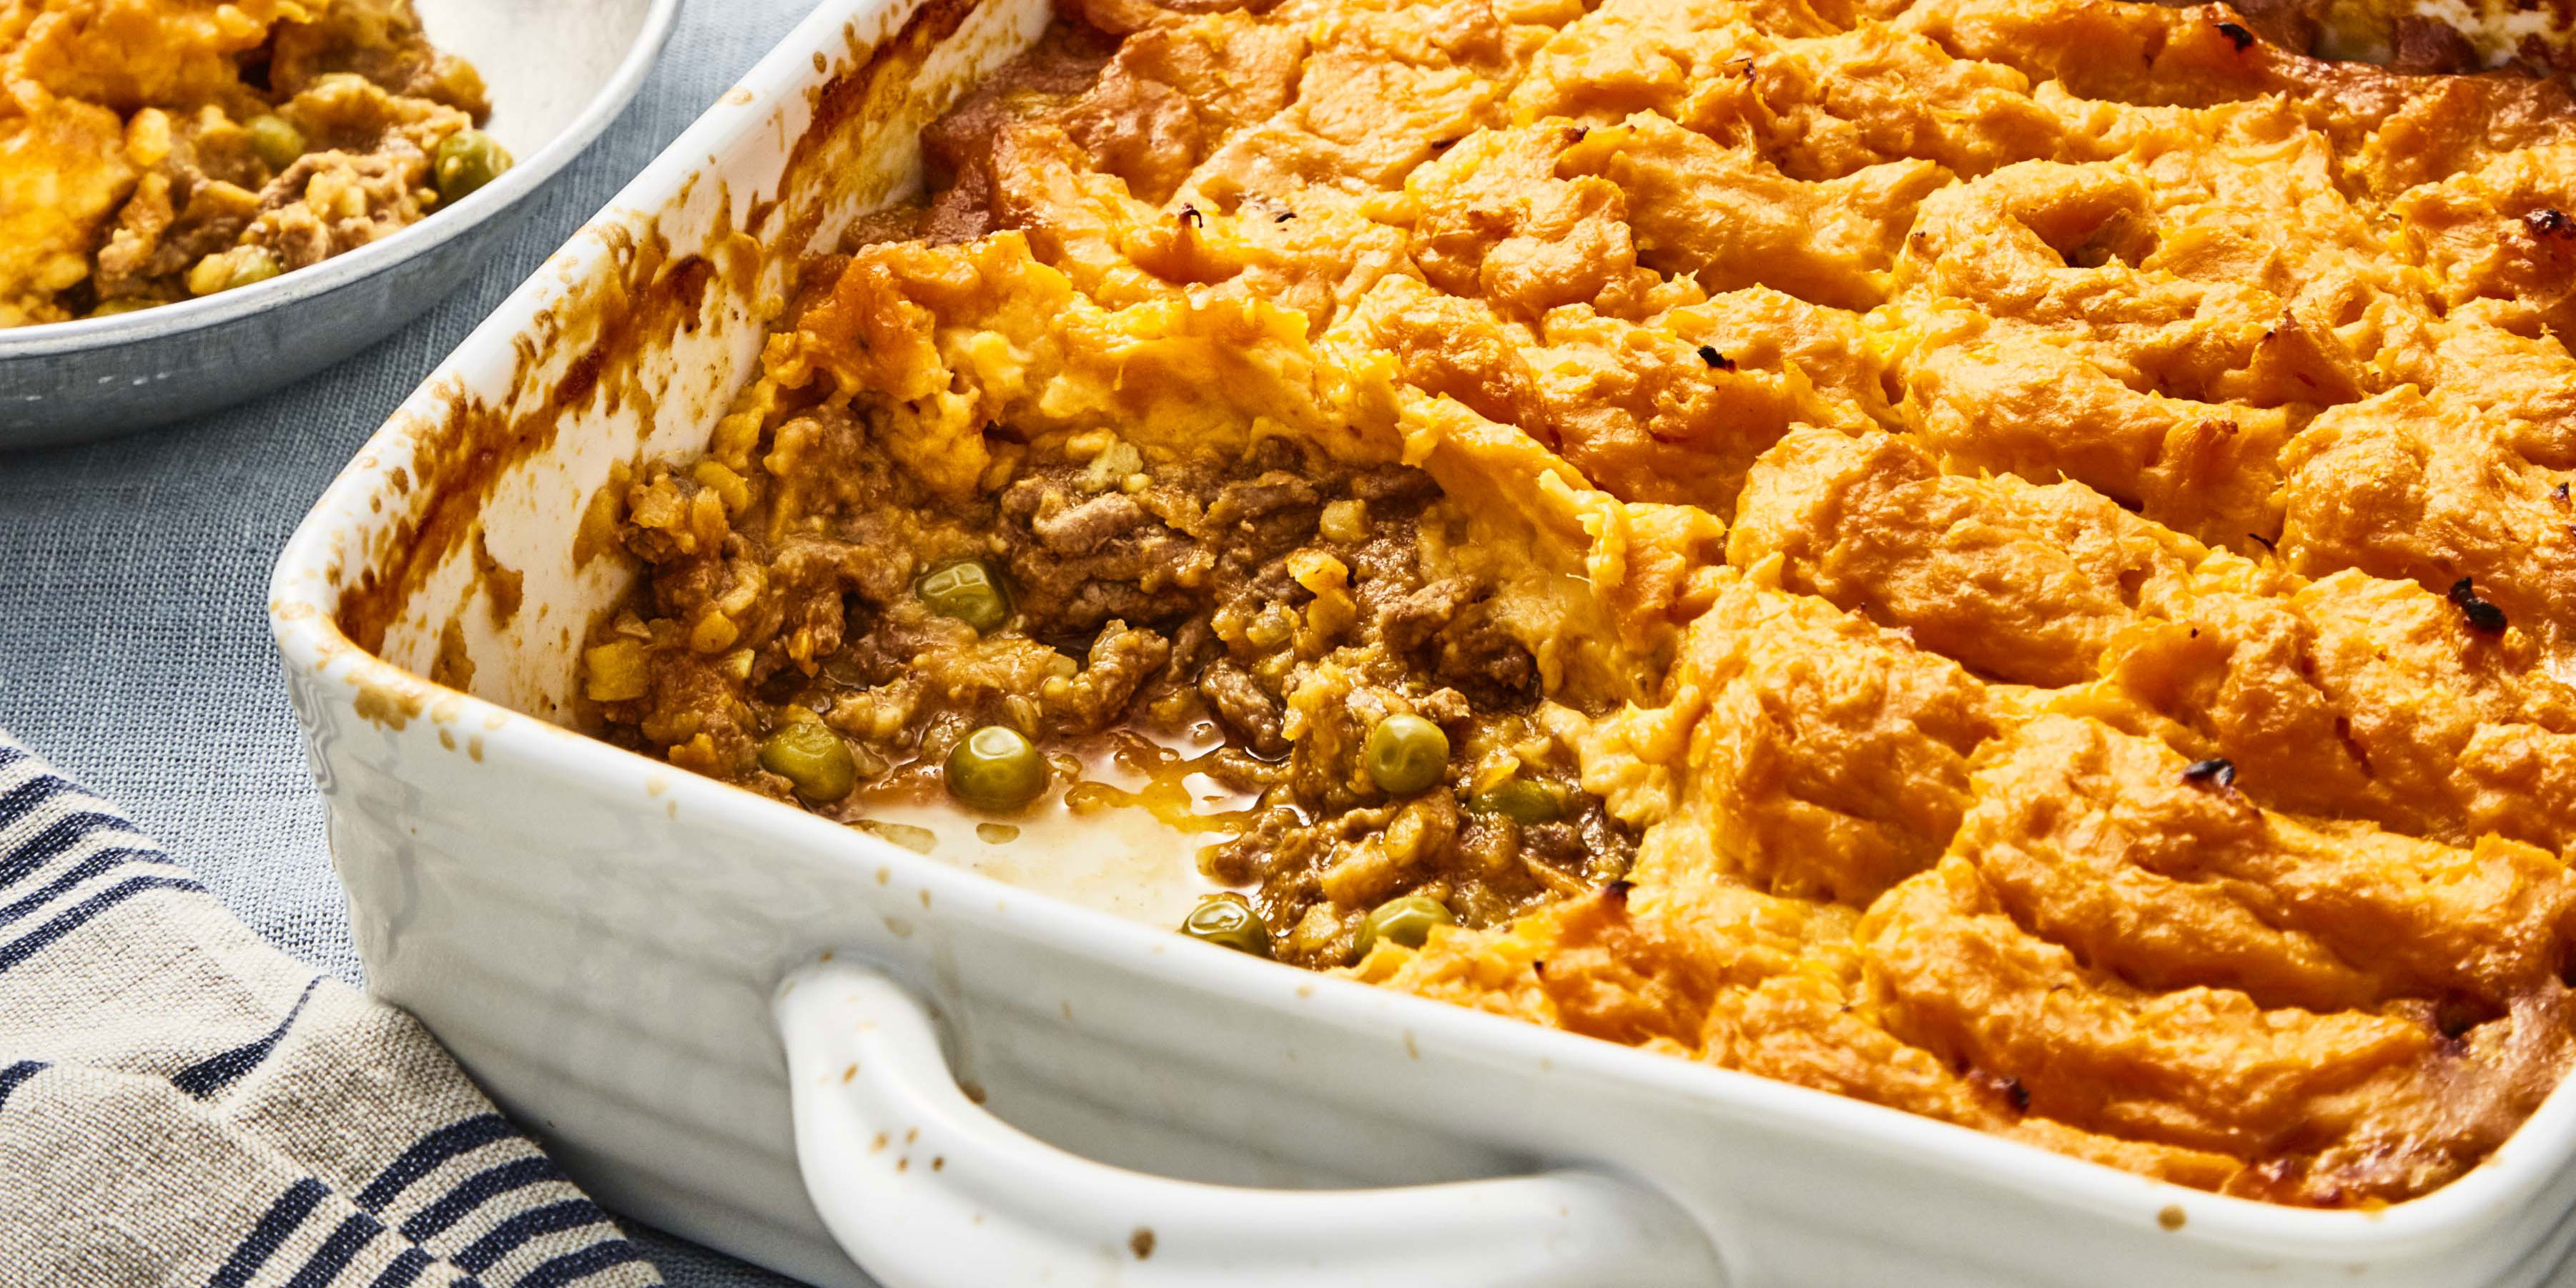 Spiced Beef and Lentil Bake with Sweet Potato Topping served in a white casserole dish with a portion removed to see the filling